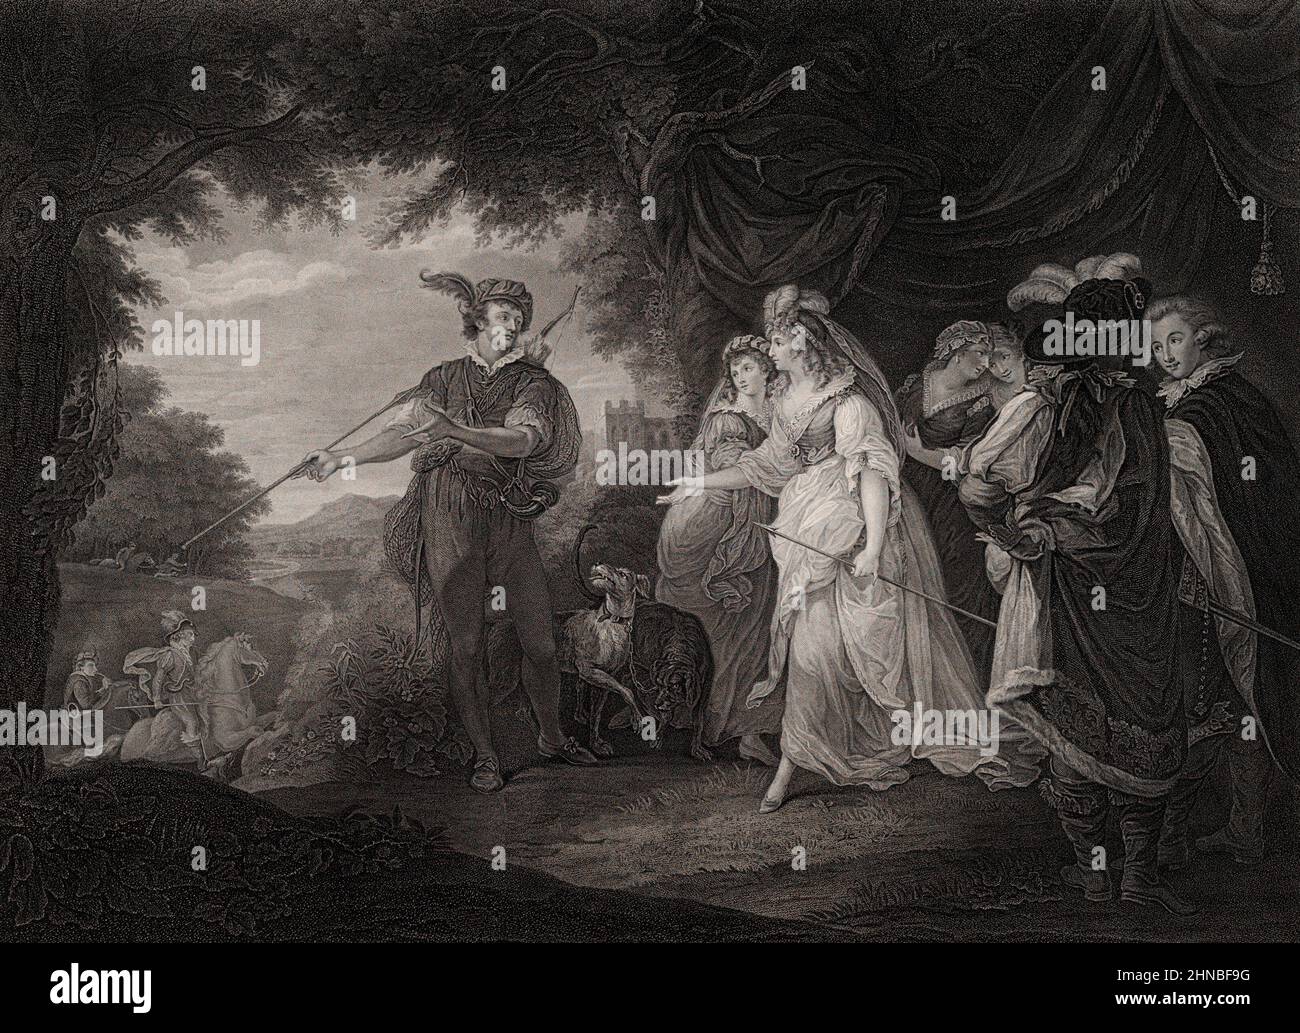 The Princess of France, Forester, Rosaline, Maria, Katherine and Lords Boyet and Costard in The King of Navarre’s park. Act 4 Scene 1 from Shakespeare, Love's Labour Lost Stock Photo